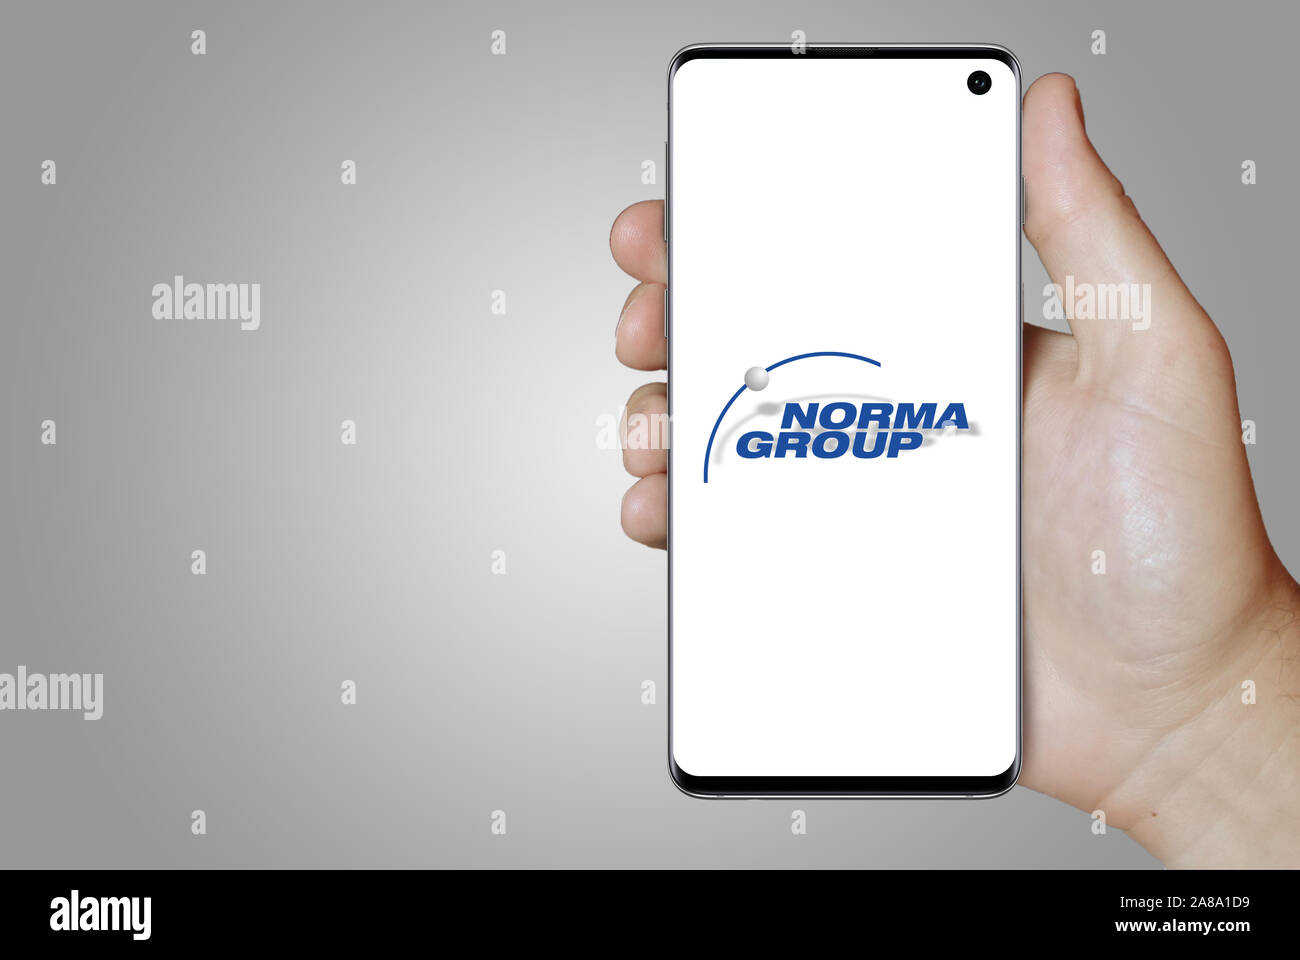 Logo of public company Norma Group displayed on a smartphone. Grey background. Credit: PIXDUCE Stock Photo